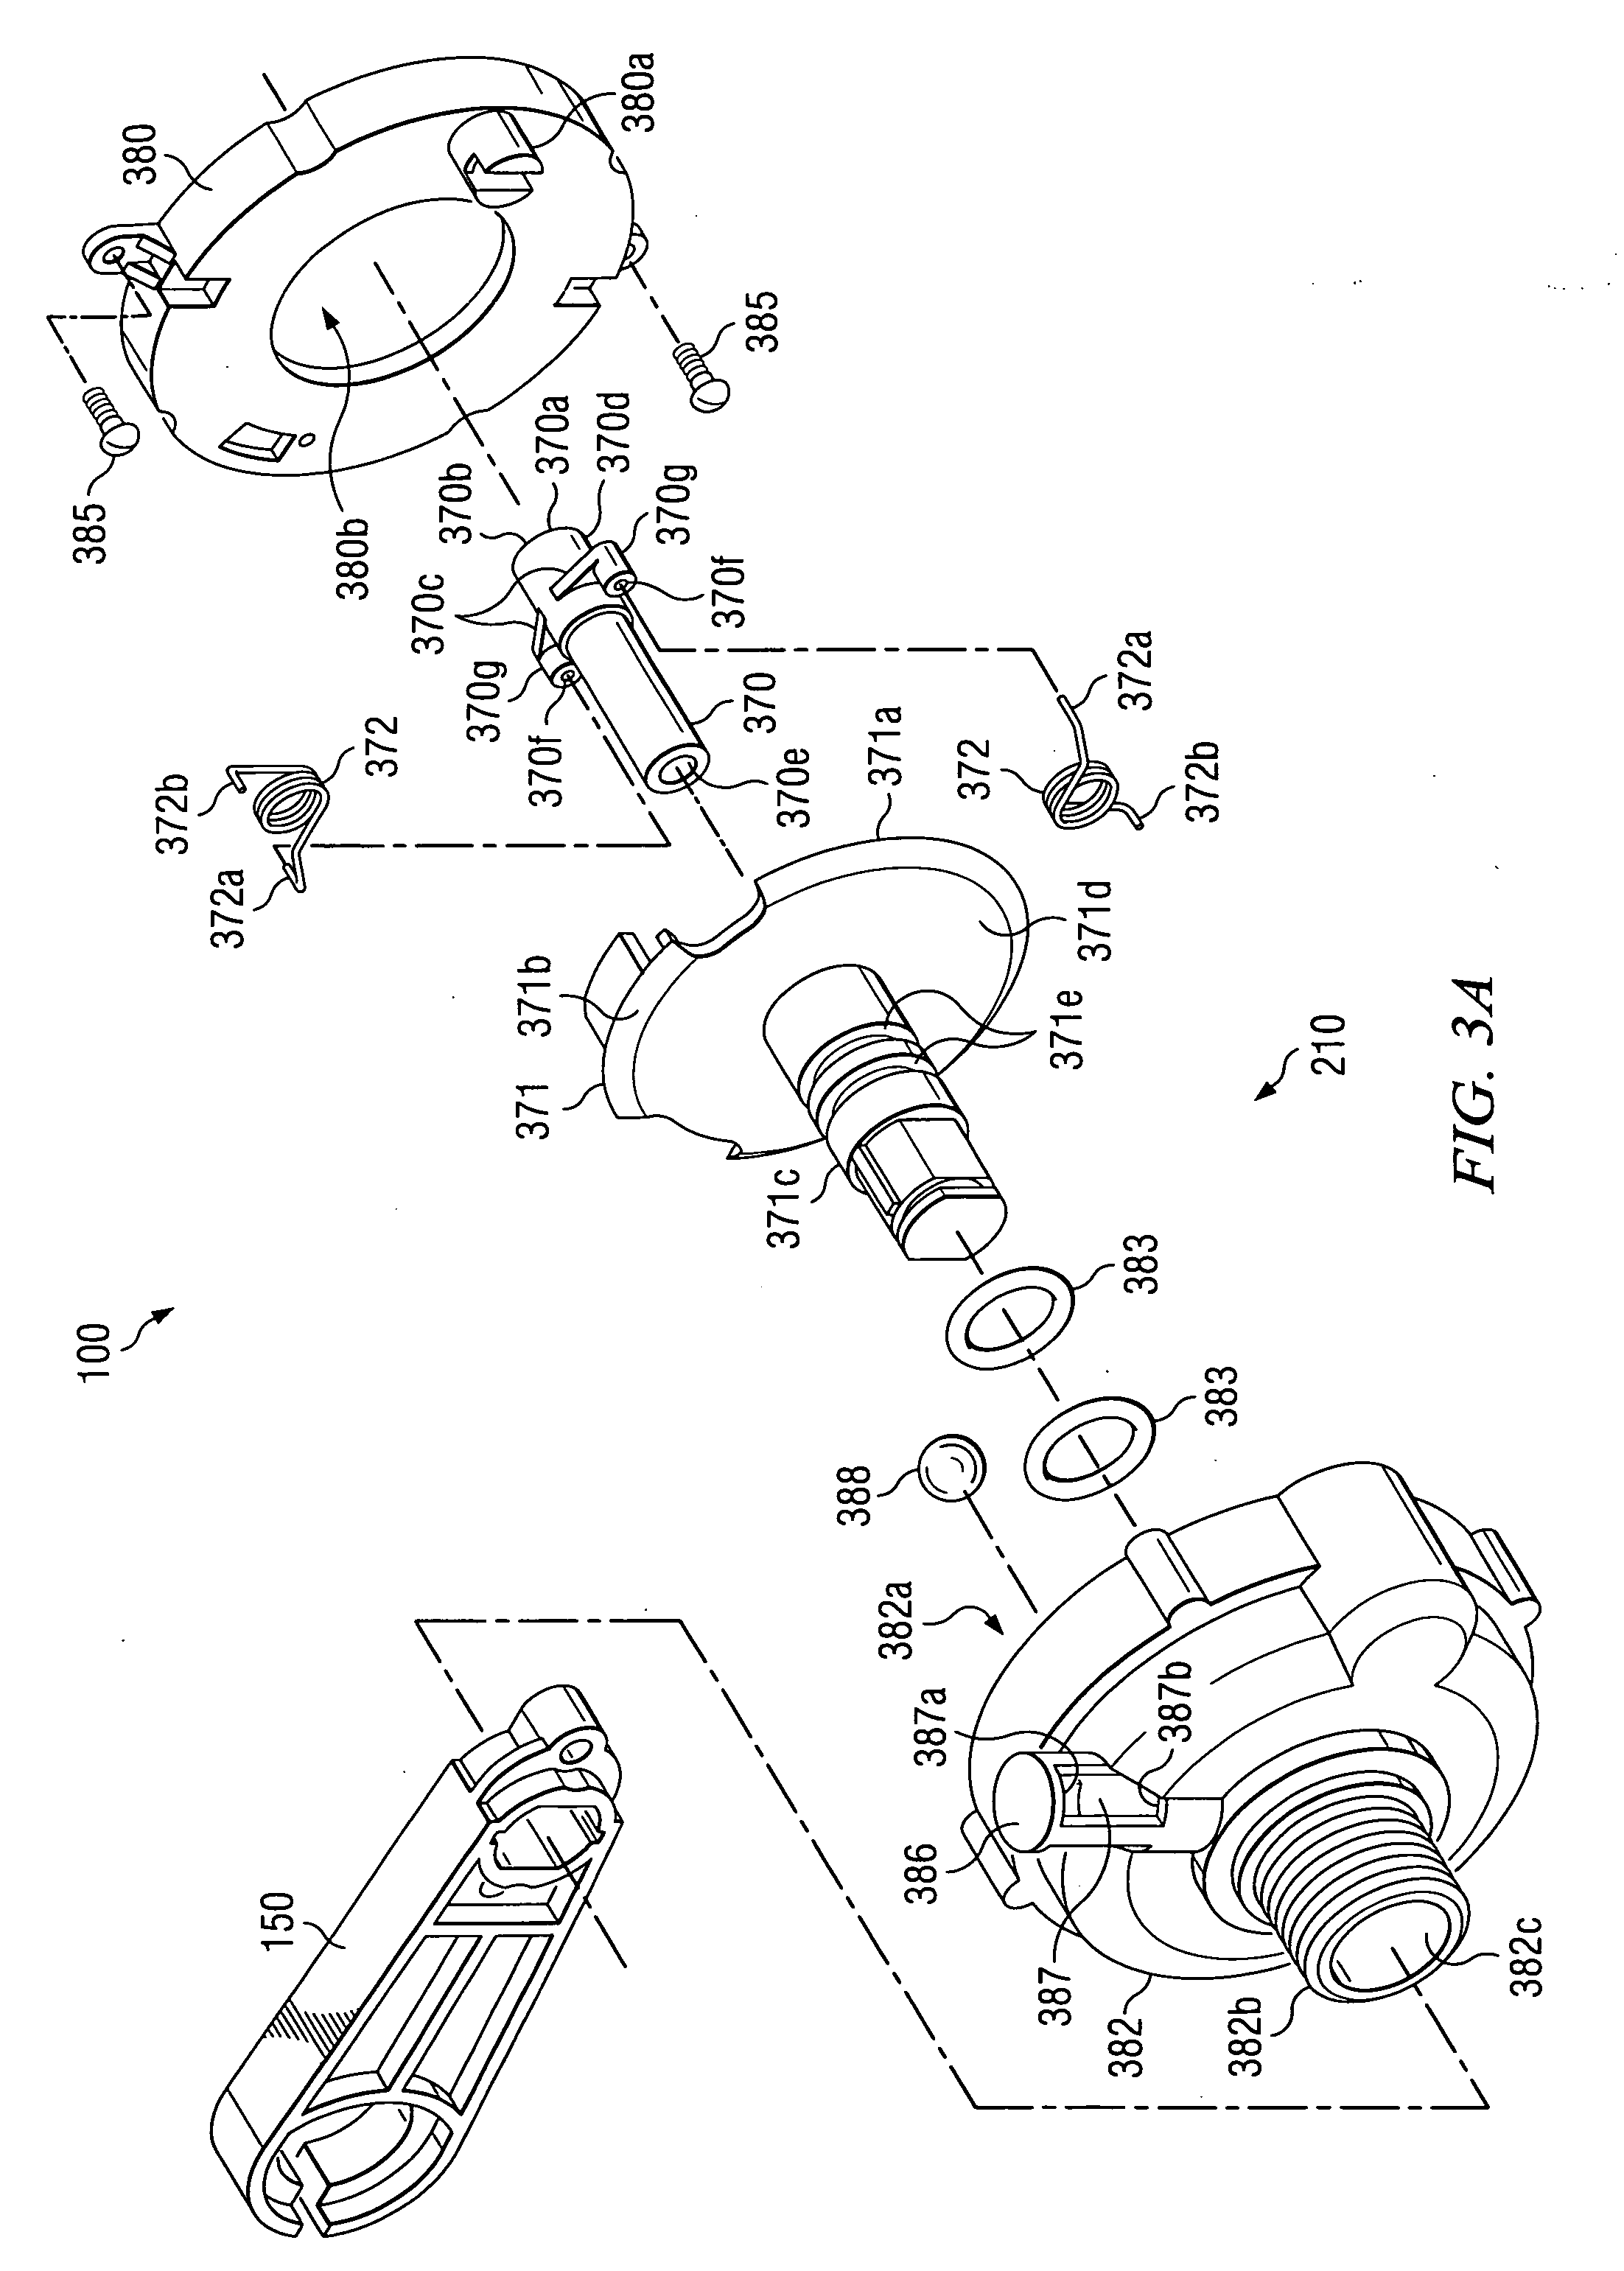 Multiple Arc Chamber Assemblies for a Fault Interrupter and Load Break Switch